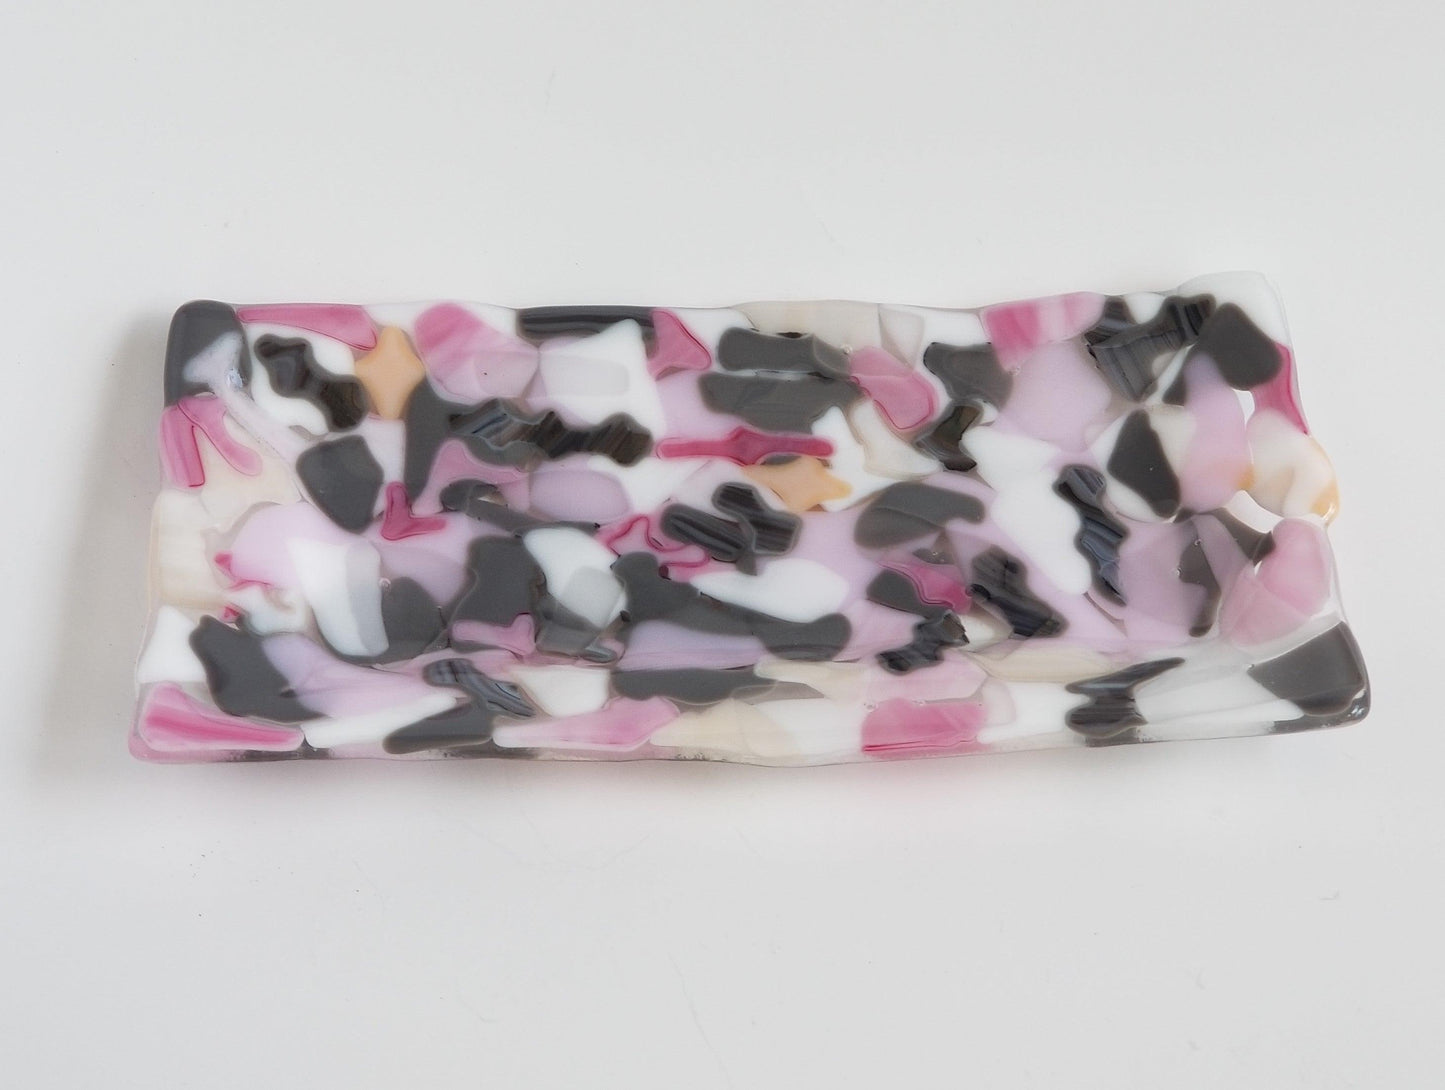 pink gray and white fused glass serving platter, spa and candle from seeds glassworks